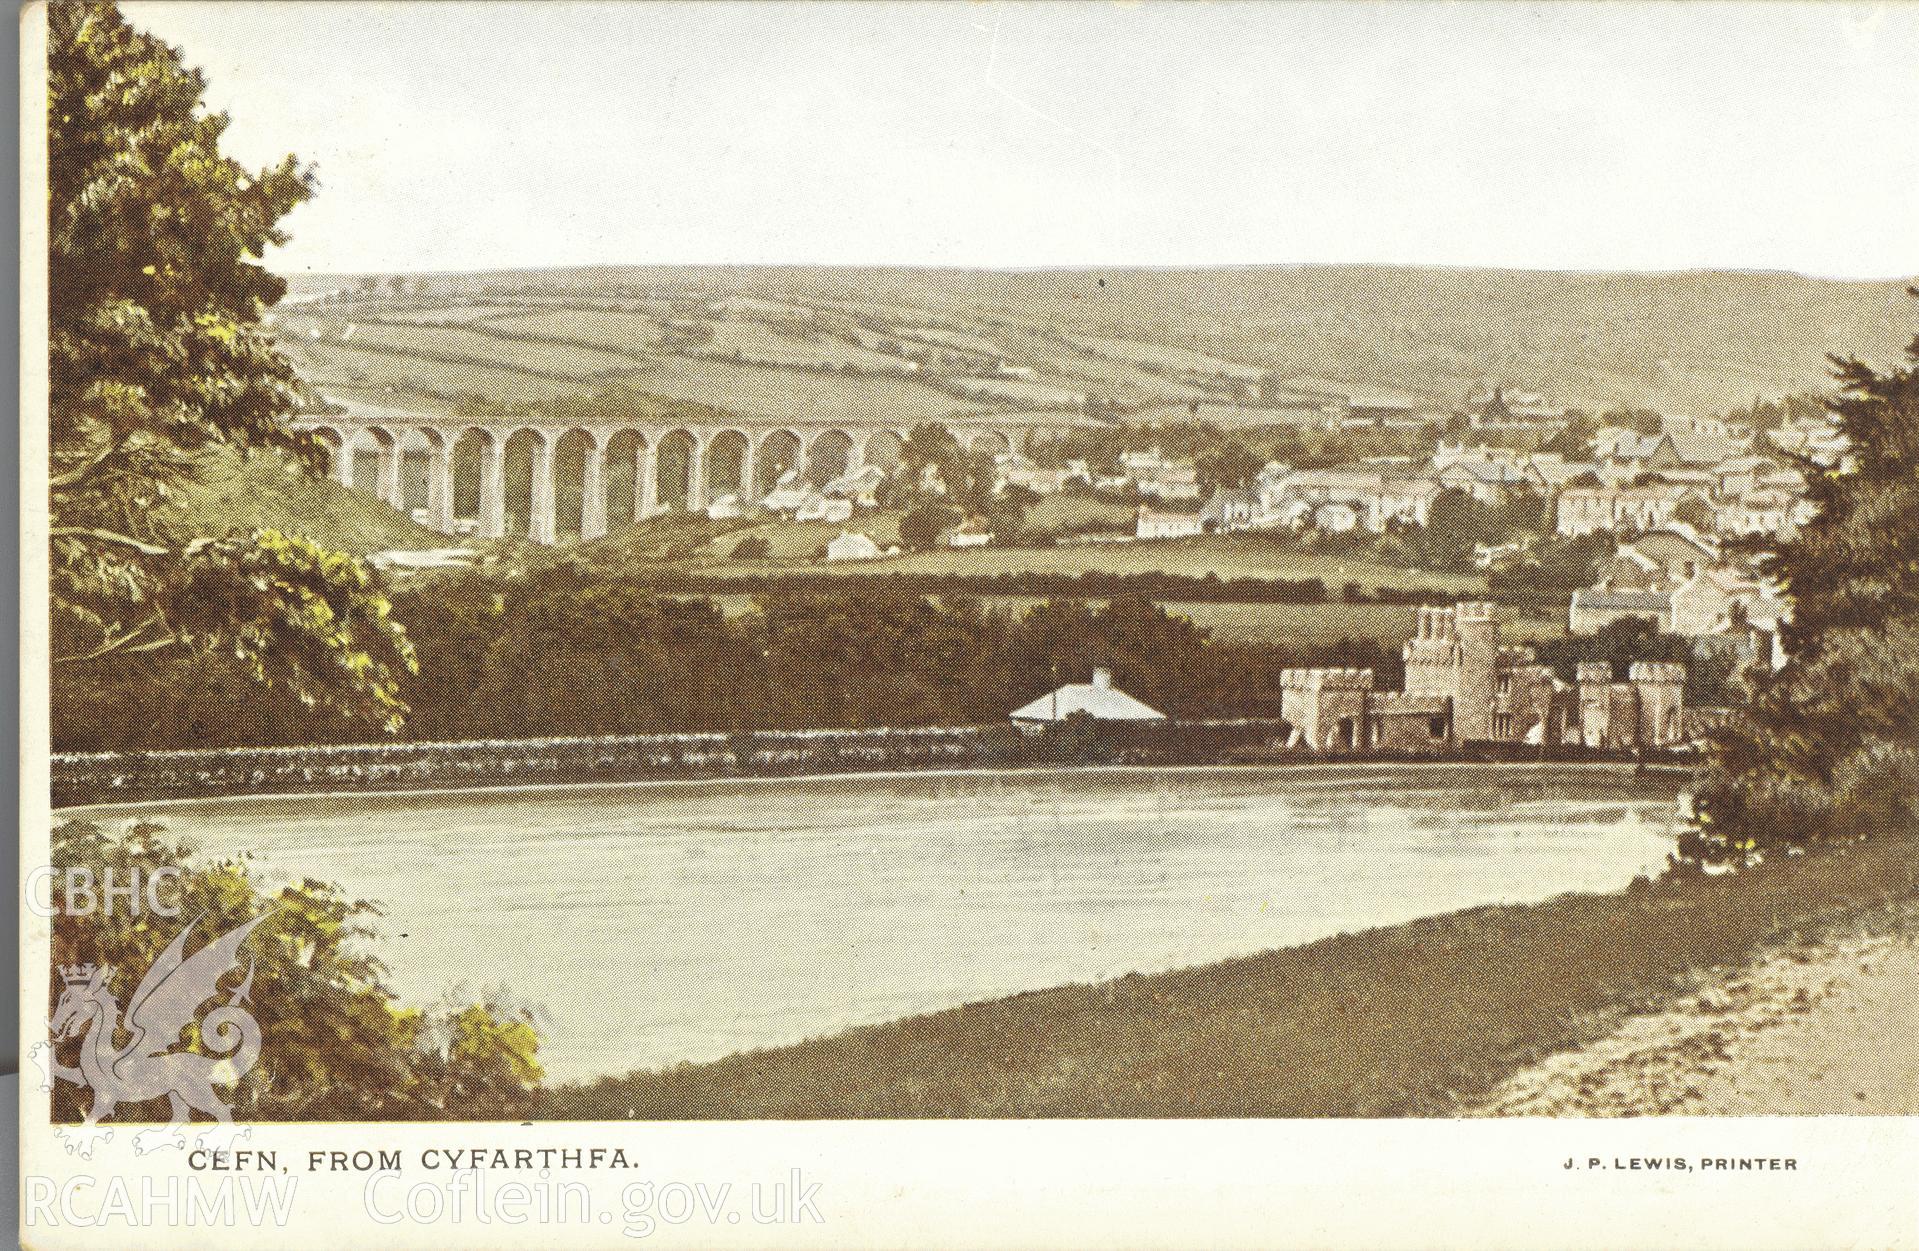 Digitised postcard image of Cyfarthfa Park, Merthyr Tydfil, showing lake, Castle, town(Cefn) and viaduct beyond, J.P. Lewis, Printer. Produced by Parks and Gardens Data Services, from an original item in the Peter Davis Collection at Parks and Gardens UK. We hold only web-resolution images of this collection, suitable for viewing on screen and for research purposes only. We do not hold the original images, or publication quality scans.